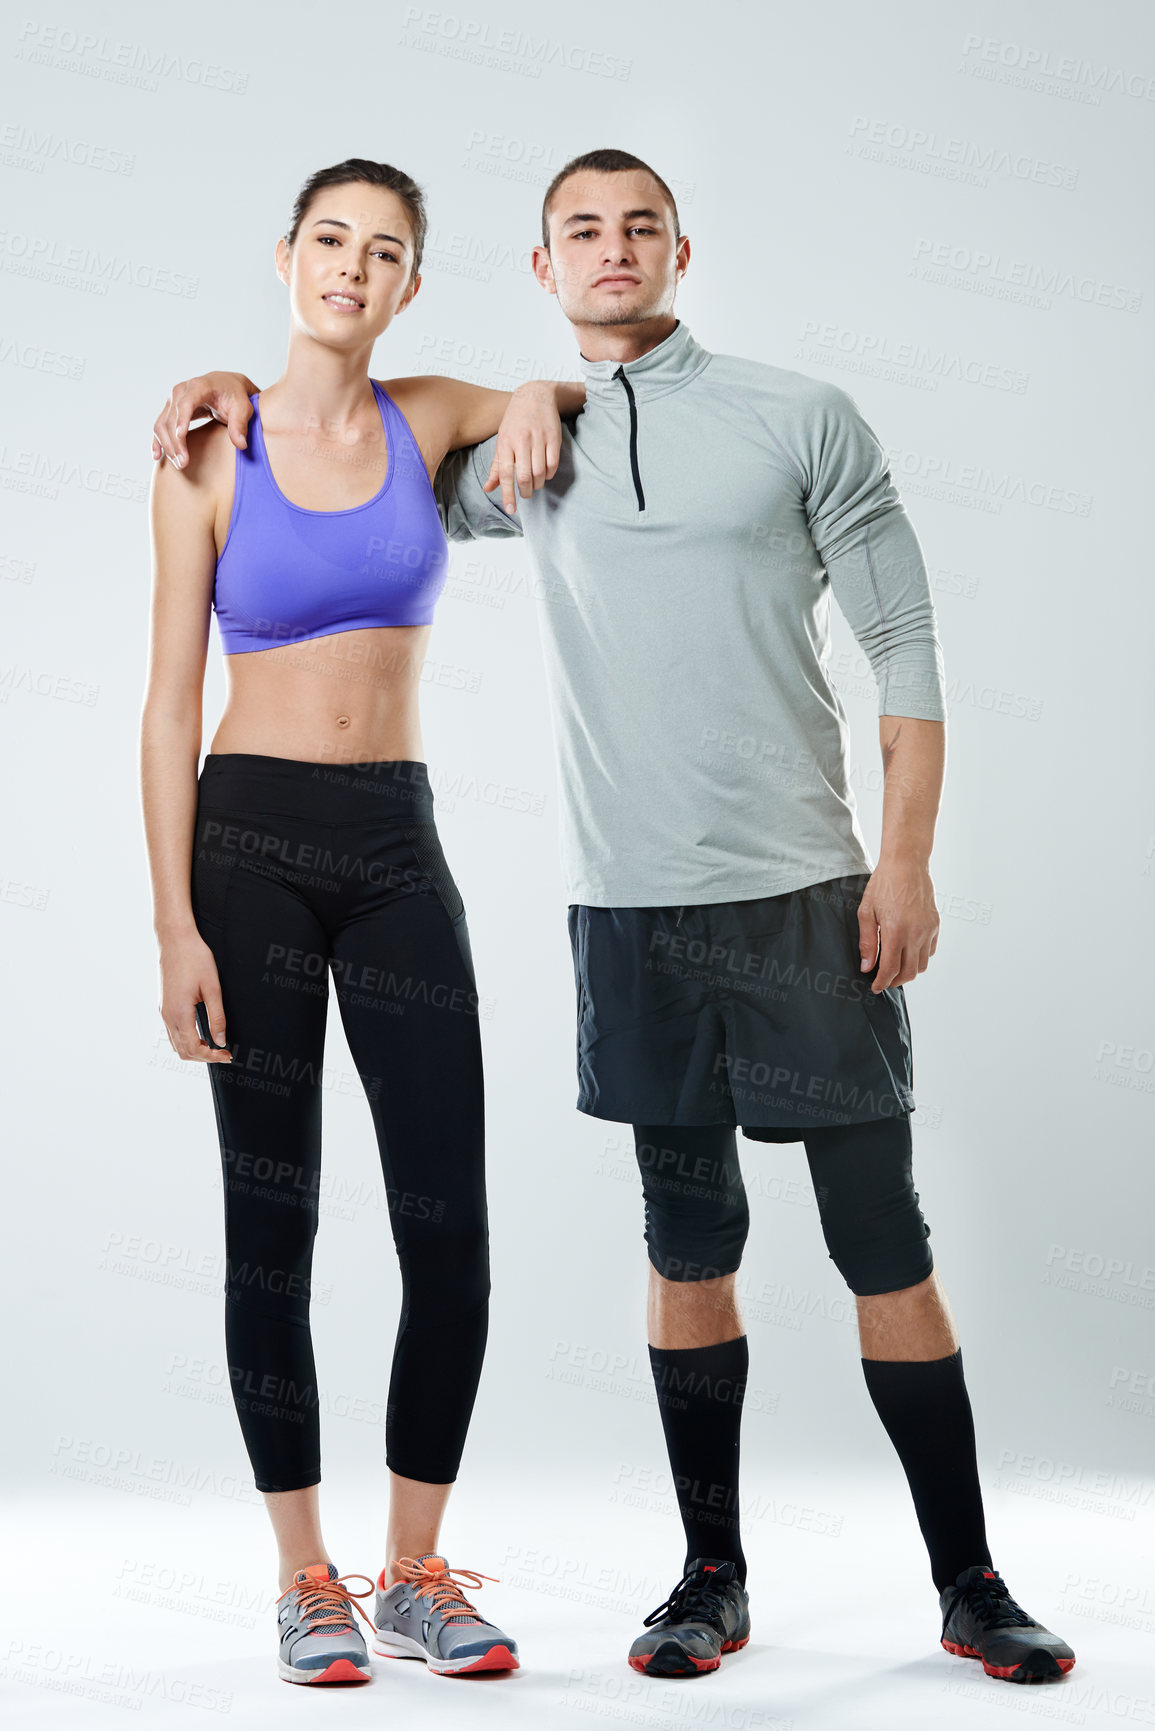 Buy stock photo Portrait of a young athletic couple standing in a studio